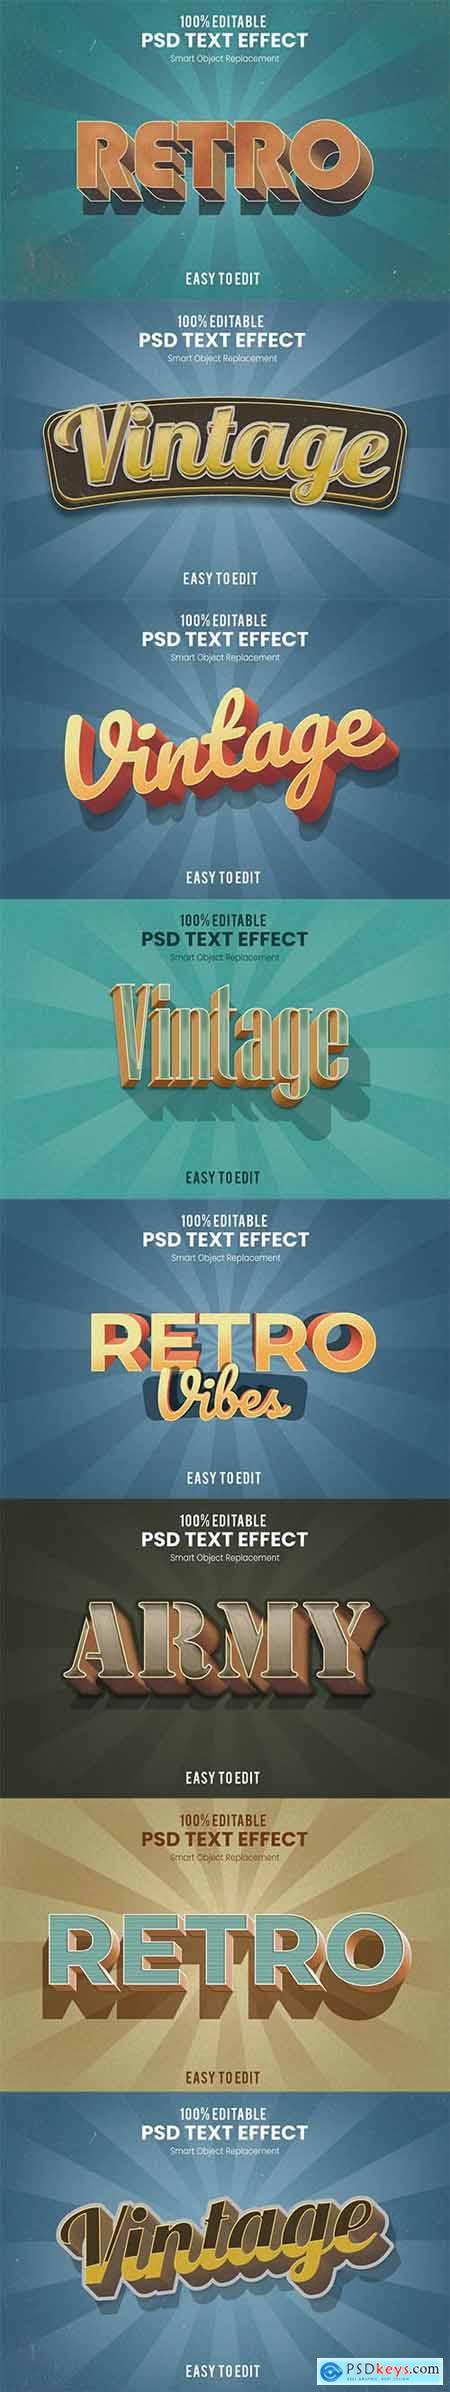 Retro 3D Text Effects Pack